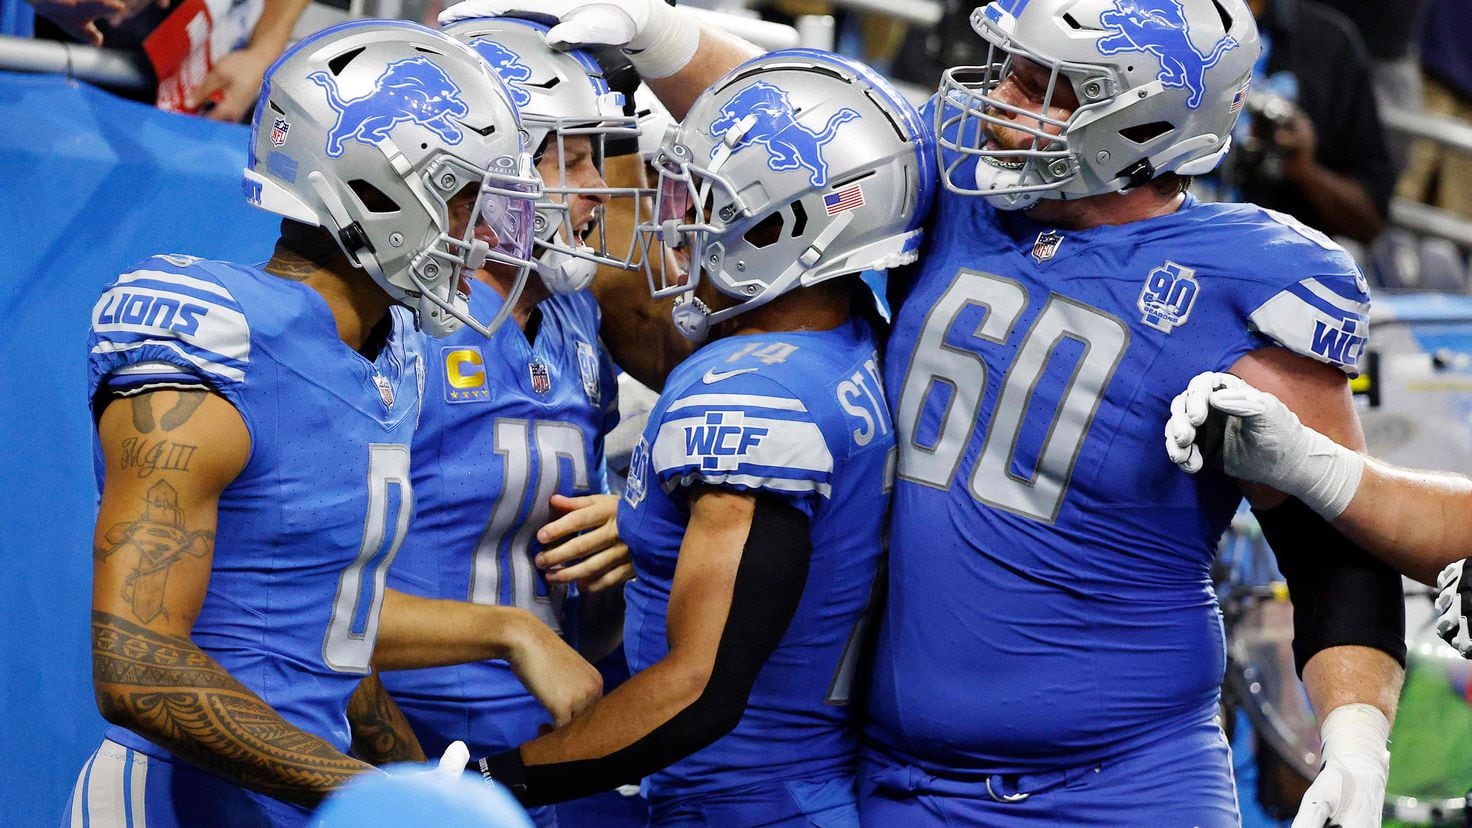 Lions - Packers: NFL Thursday Night Football injury report